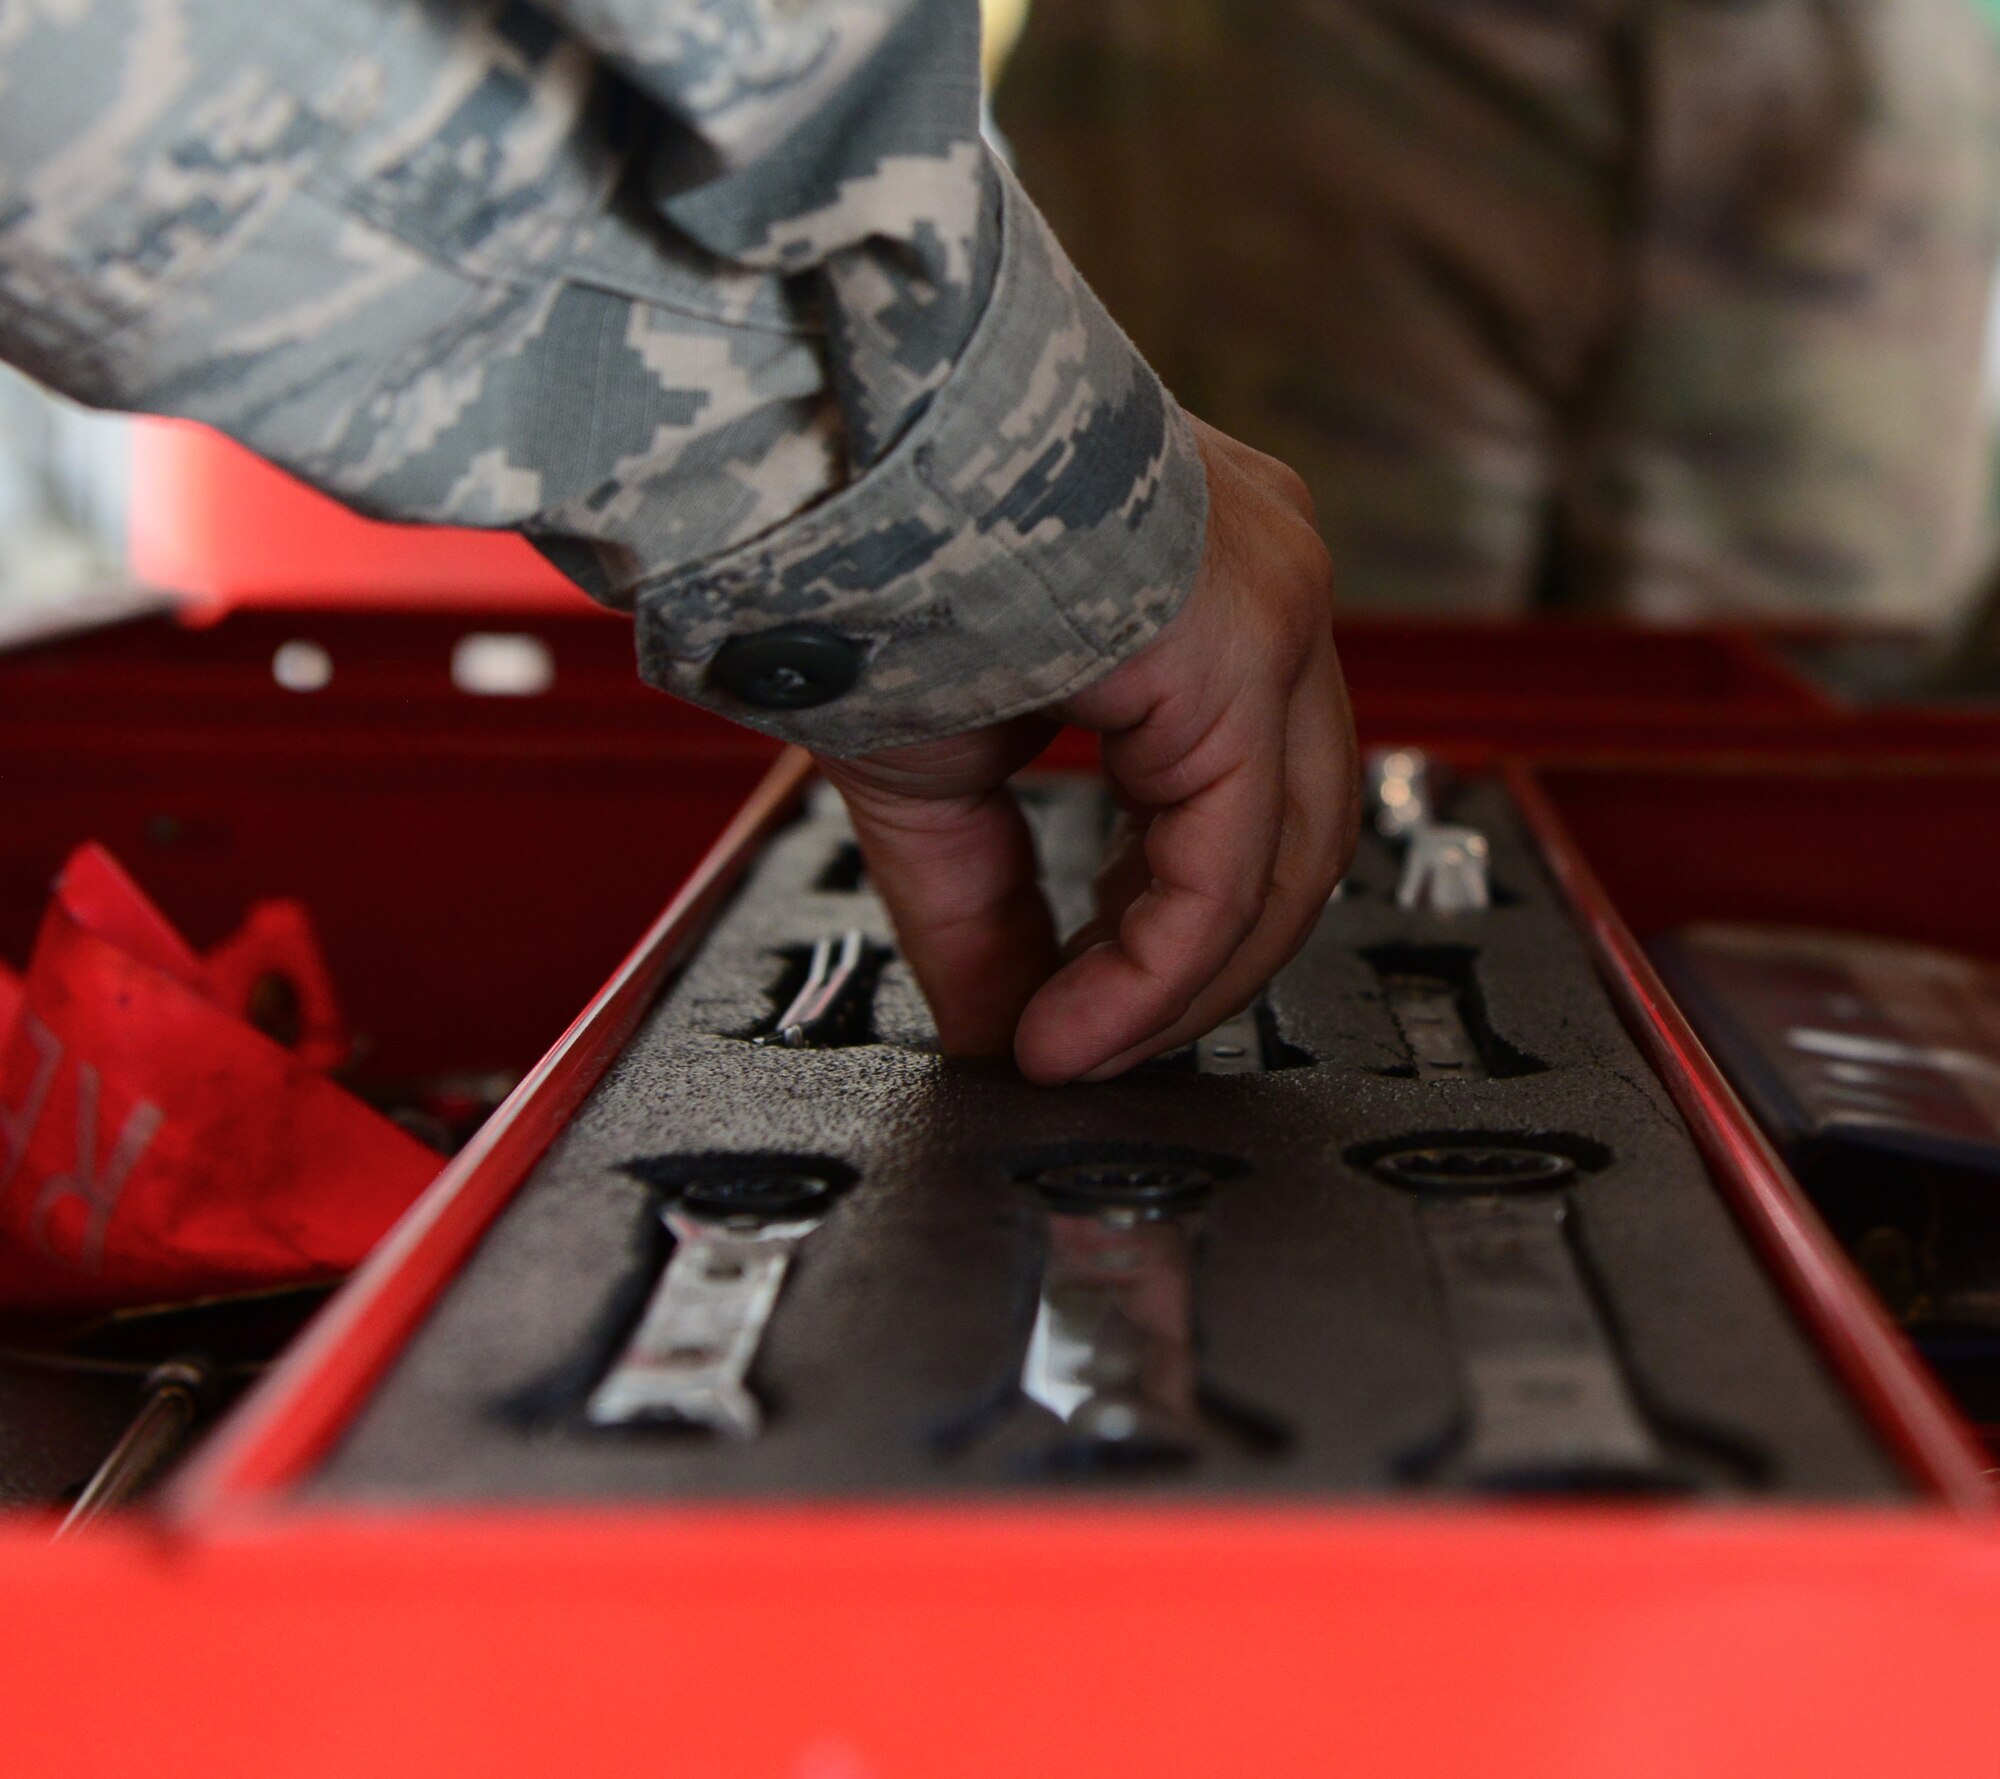 Tech. Sgt. Stephen Bartorillo, 9th Maintenance Squadron repair and reclamation craftsman, grabs a wrench from a tool box needed to complete phase maintenance on a U-2 Dragon Lady